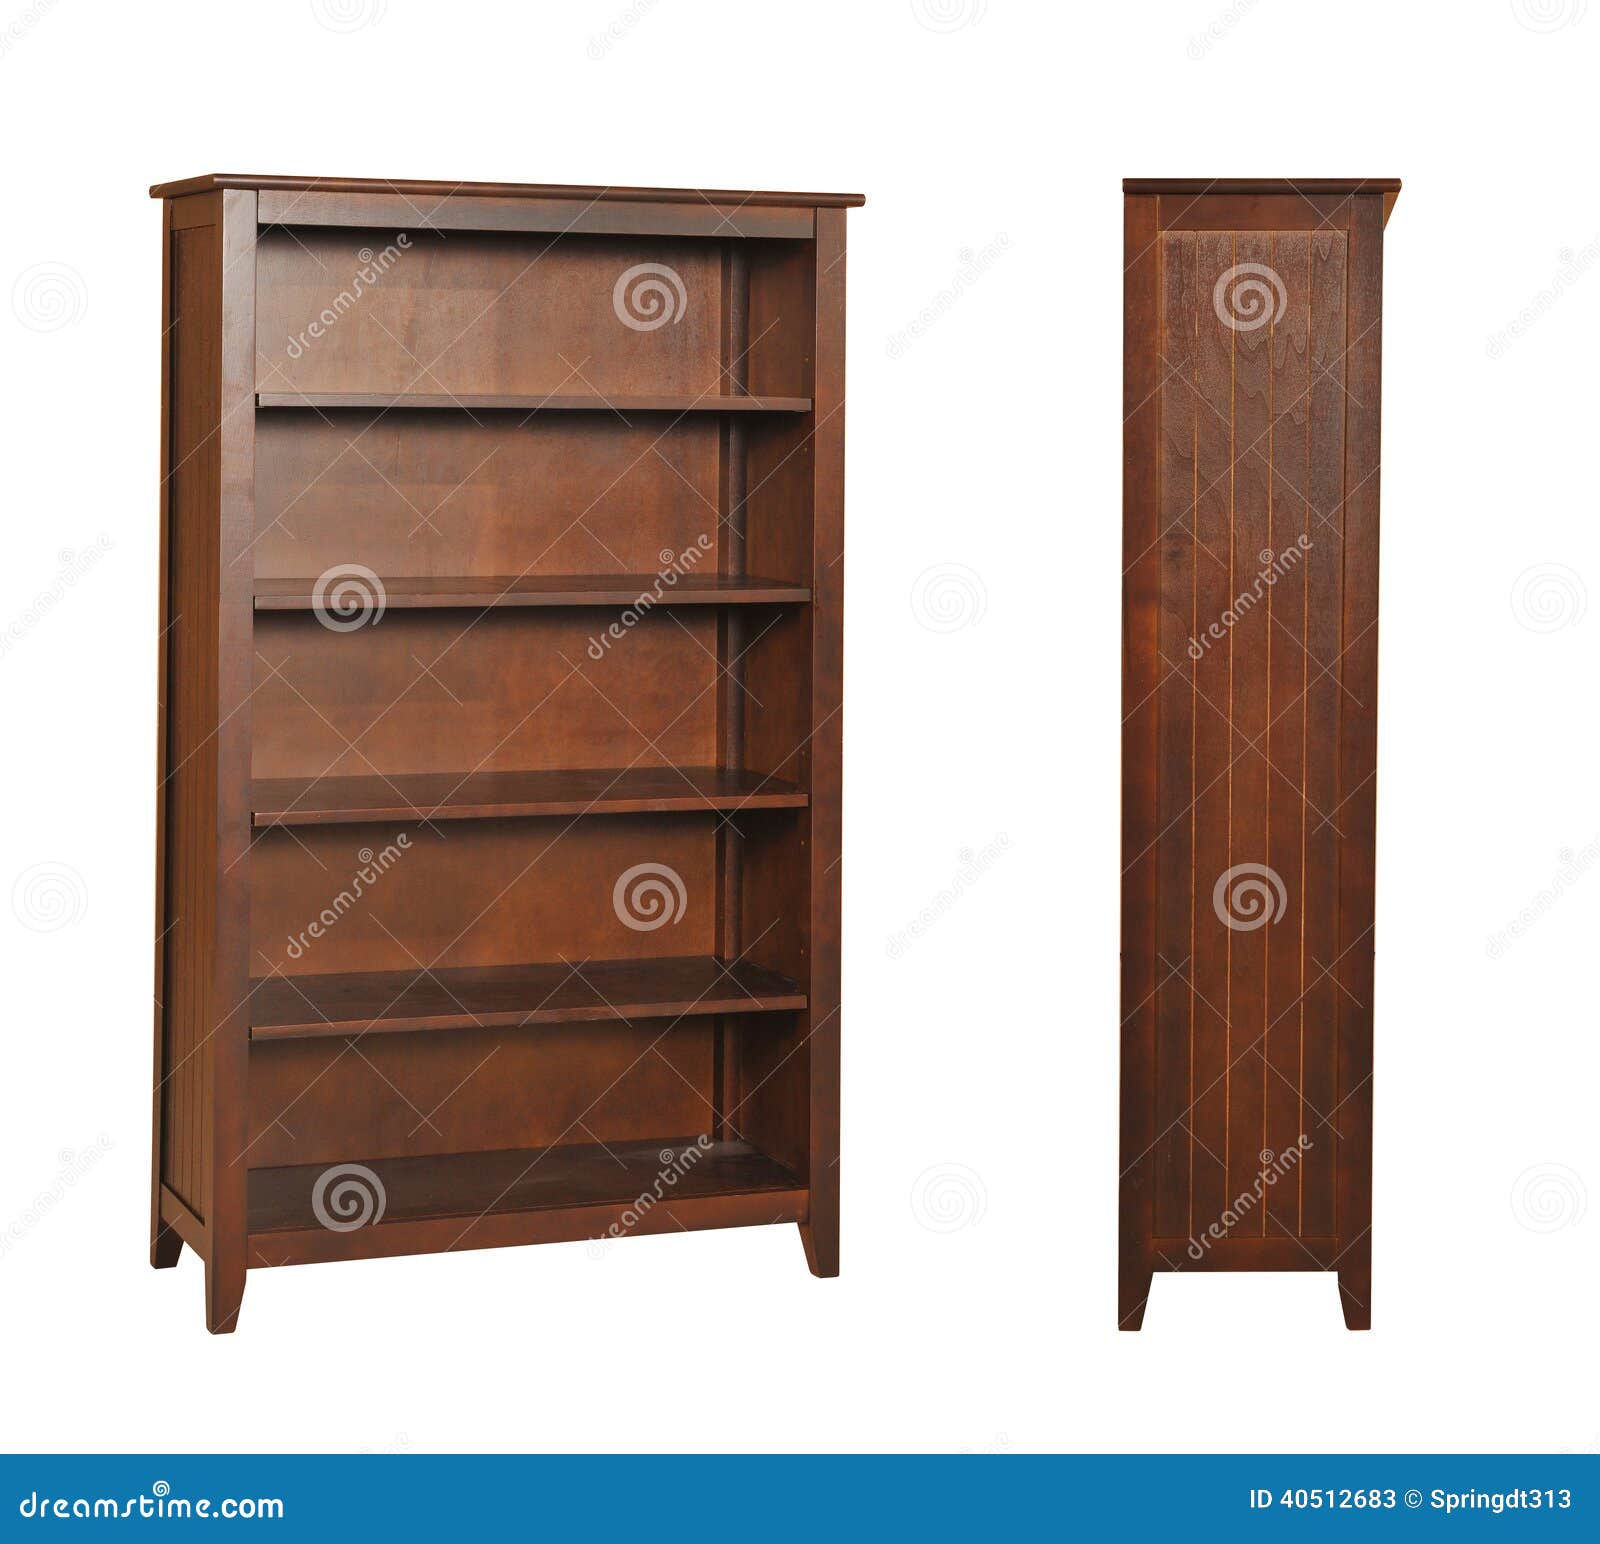 Wooden Cabinet Bookcase Stock Image Image Of Design 40512683